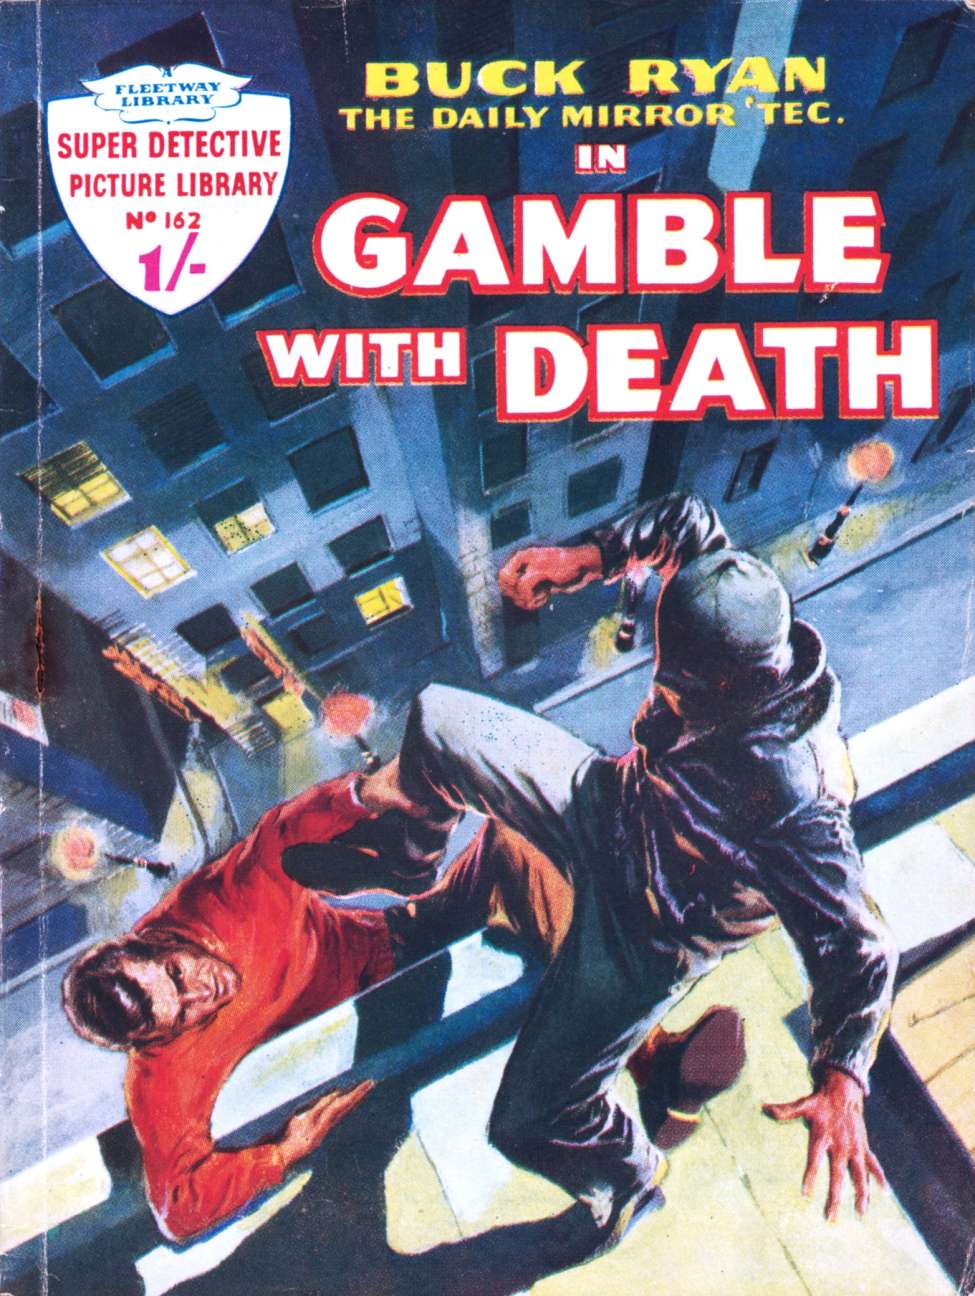 Comic Book Cover For Super Detective Library 162 - Buck Ryan in Gamble With Death